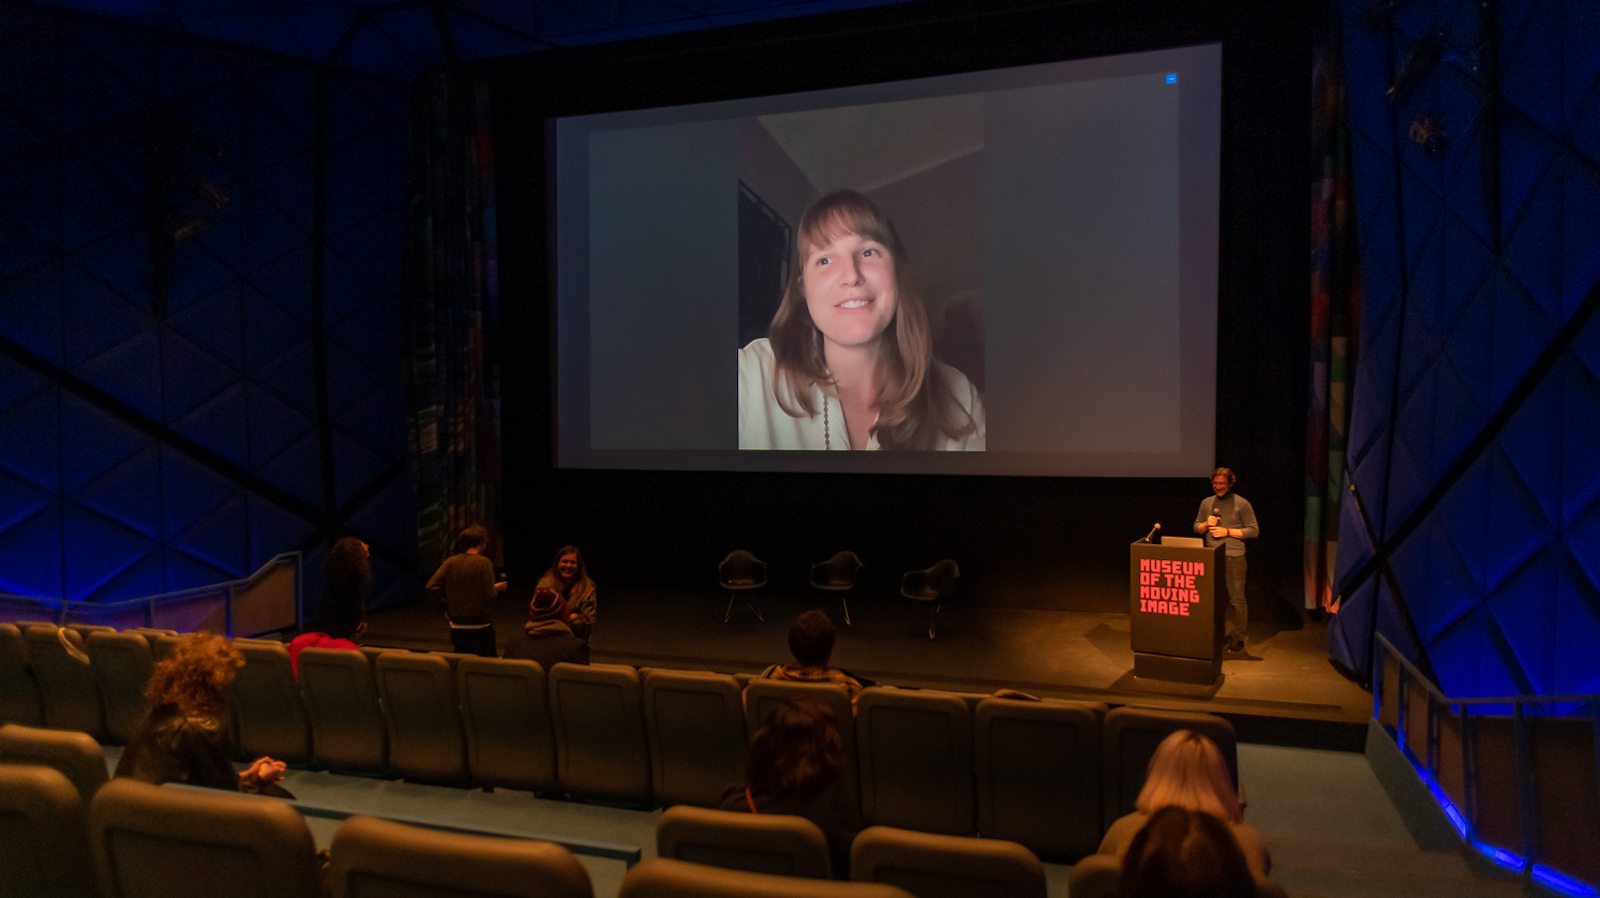 A large movie theater with an image of a woman projected on the screen and a person at a podium on the stage next to the screen